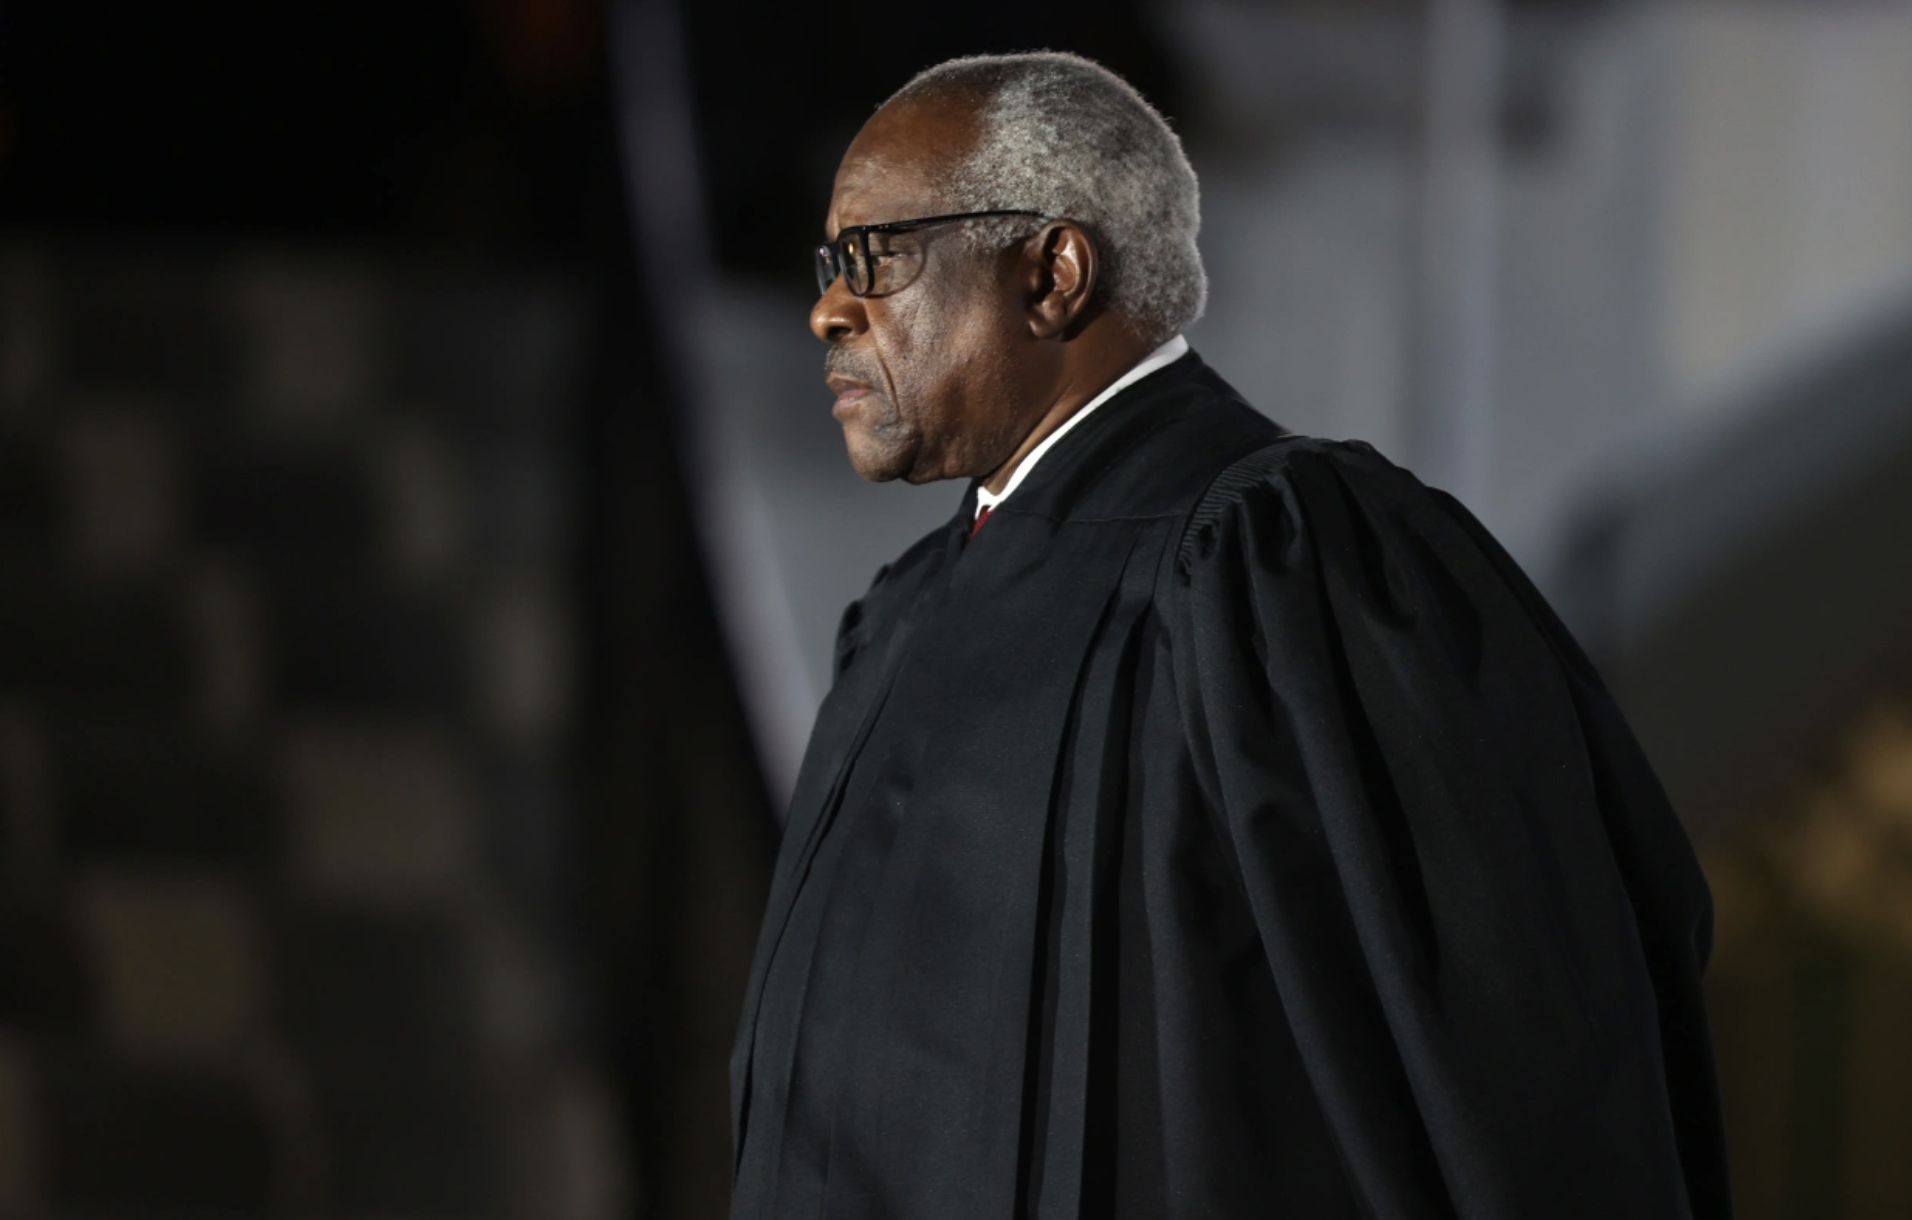 Call on Justice Thomas to Recuse Himself in Trump v. United States